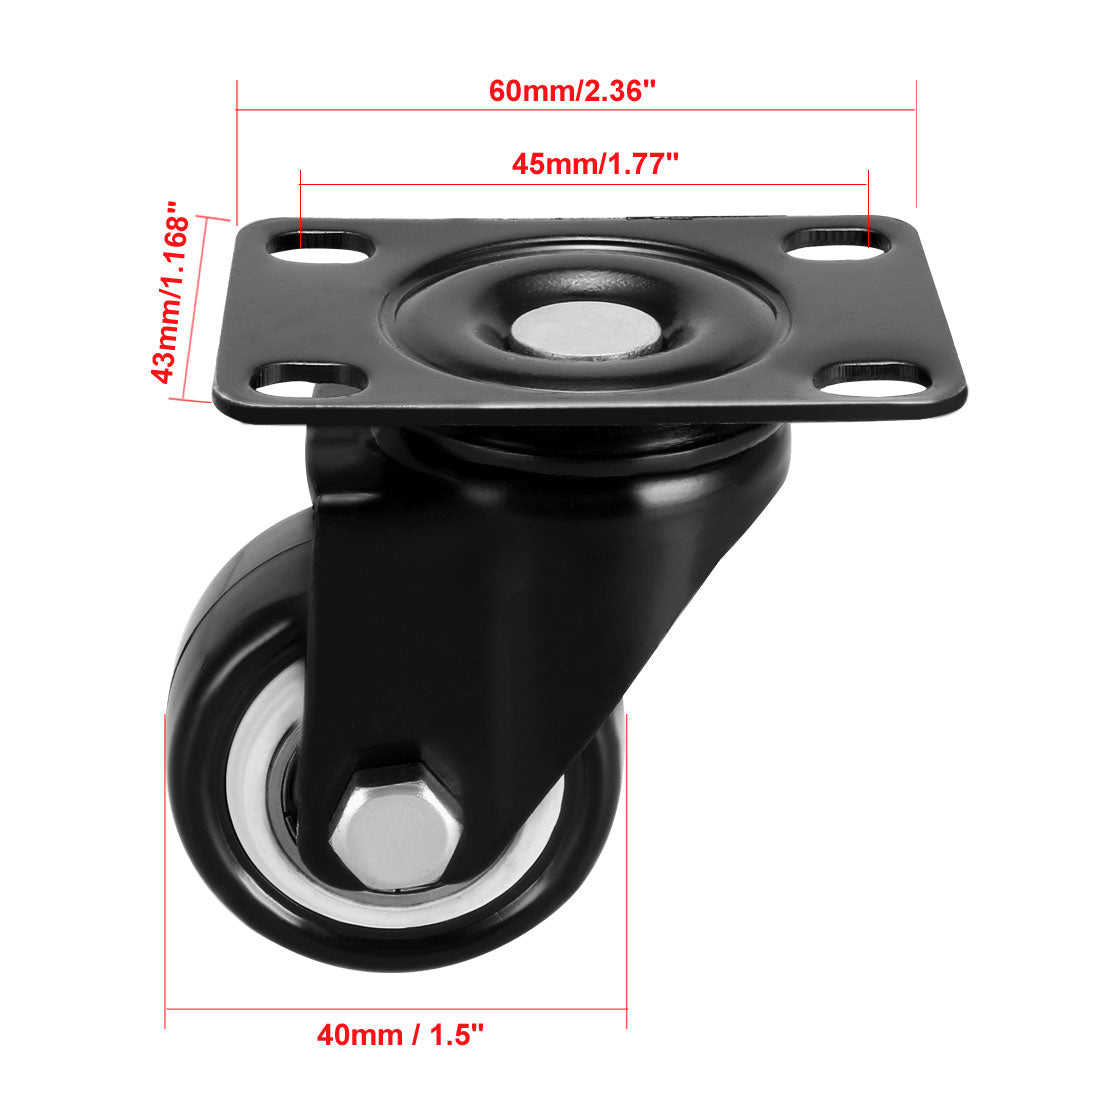 uxcell Uxcell Swivel Fixed Casters 1.5 Inch PU Top Plate Mounted Caster Wheels, 110lb Capacity Each, 4 Pcs (2 Pcs Swivel, 2 Pcs Fixed)